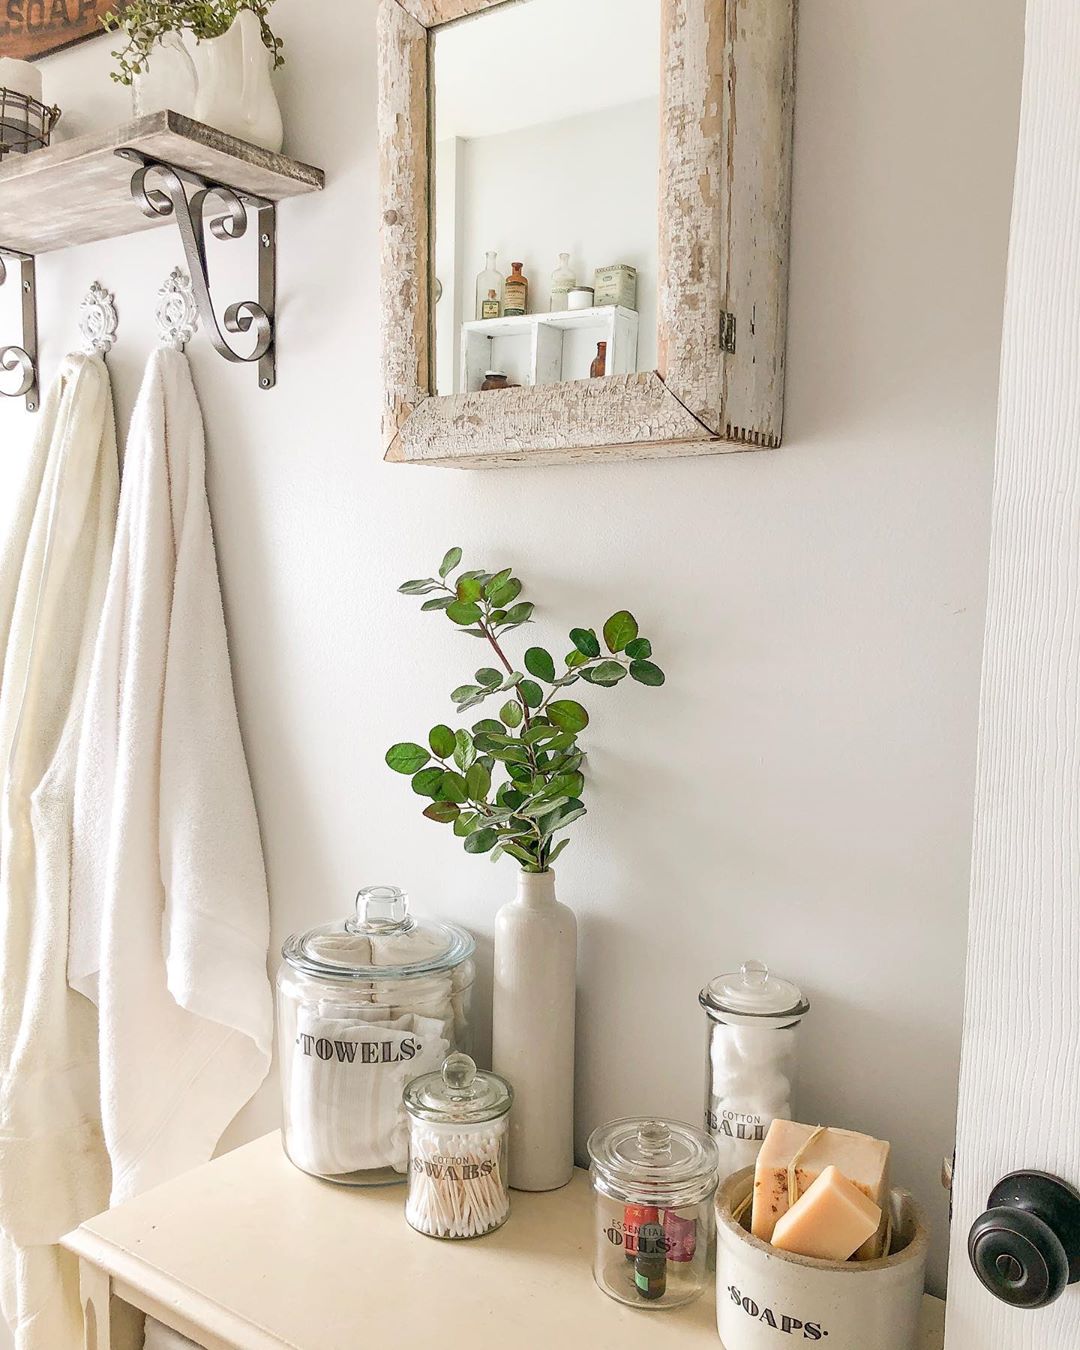 White cabinet with glass jars and rustic mirror hung above cabinet. Photo by Instagram user @the.huber.homestead